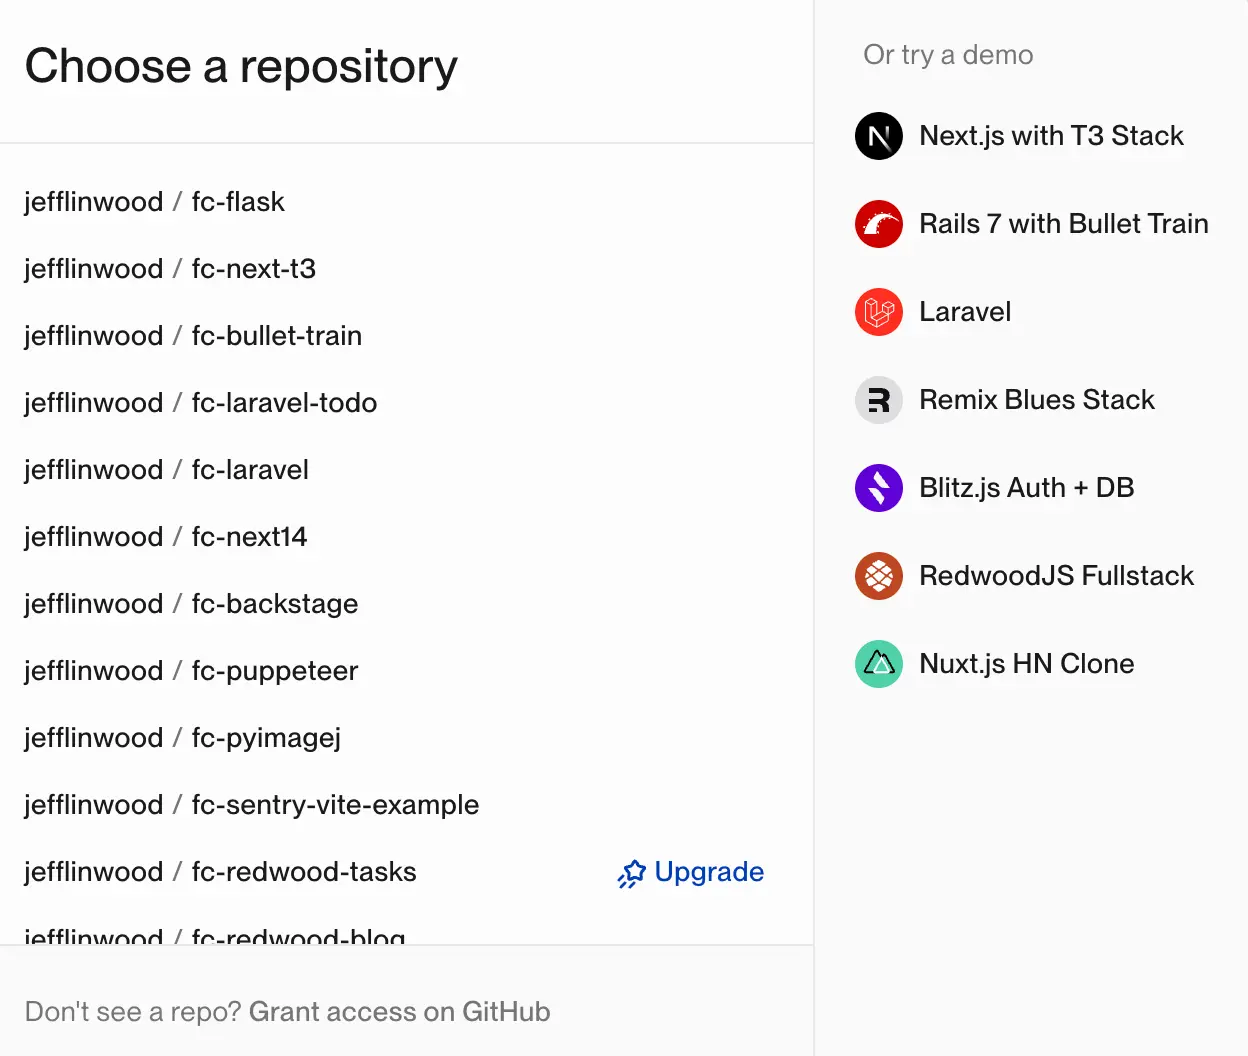 Choose a repository or a demo on the dashboard